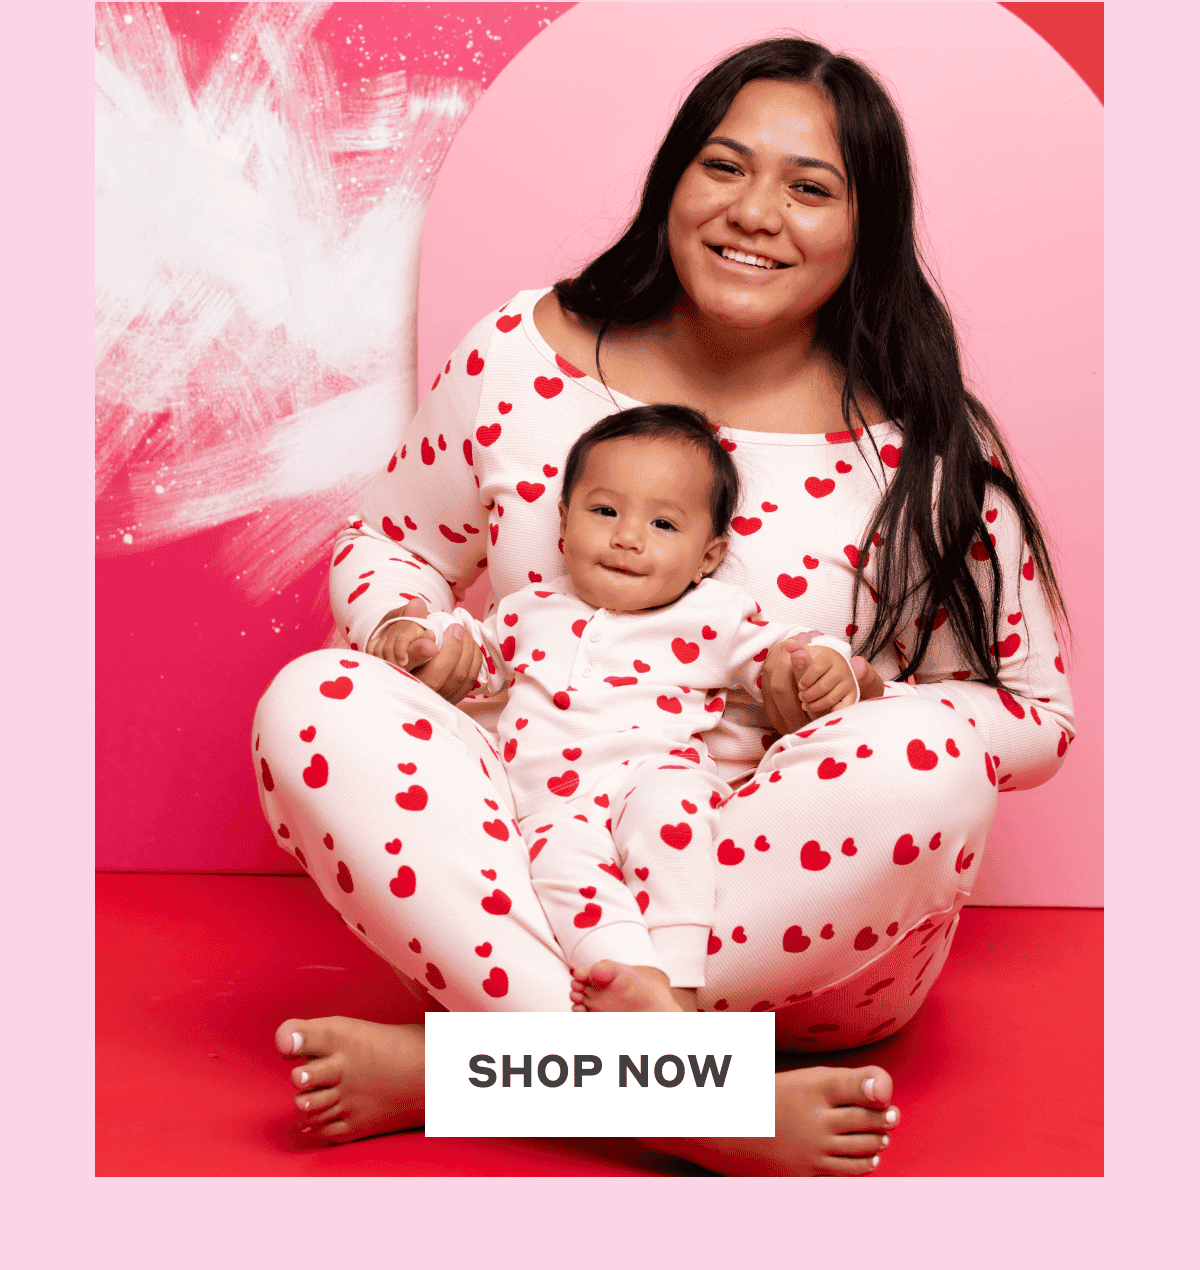 February baby on the way? Shop Now!